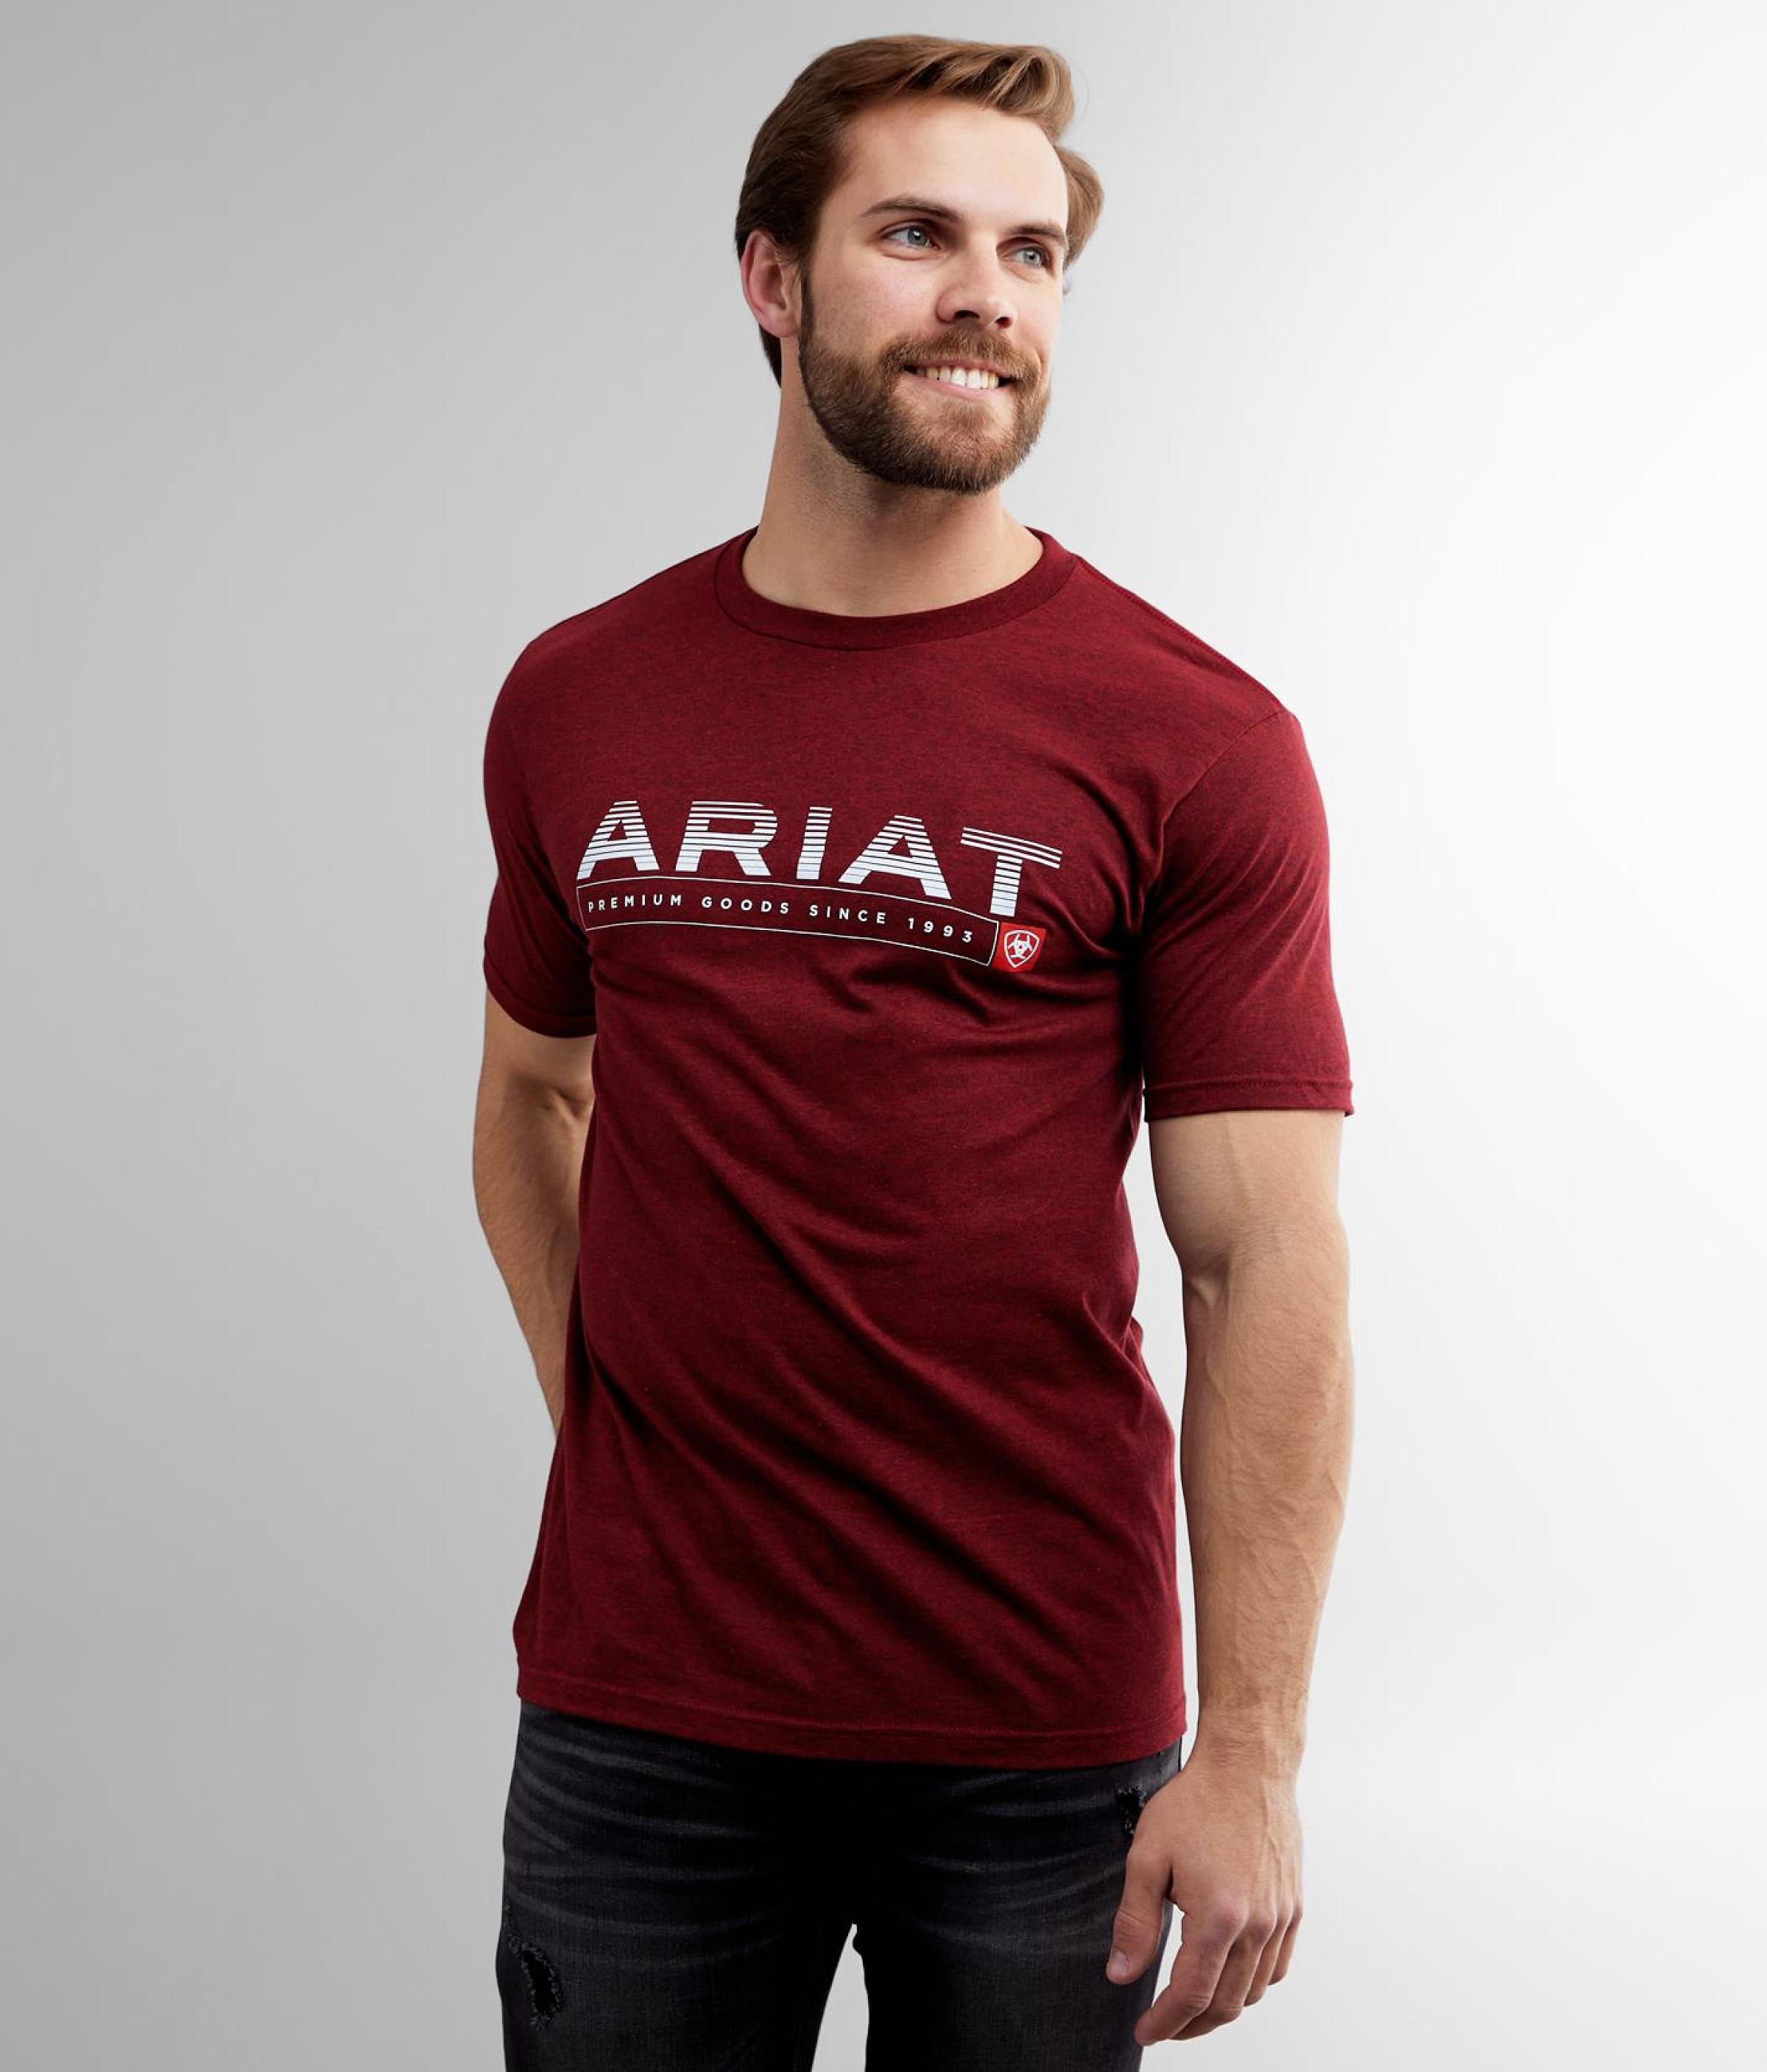 Ariat Lines T-shirt in Red for Men - Lyst